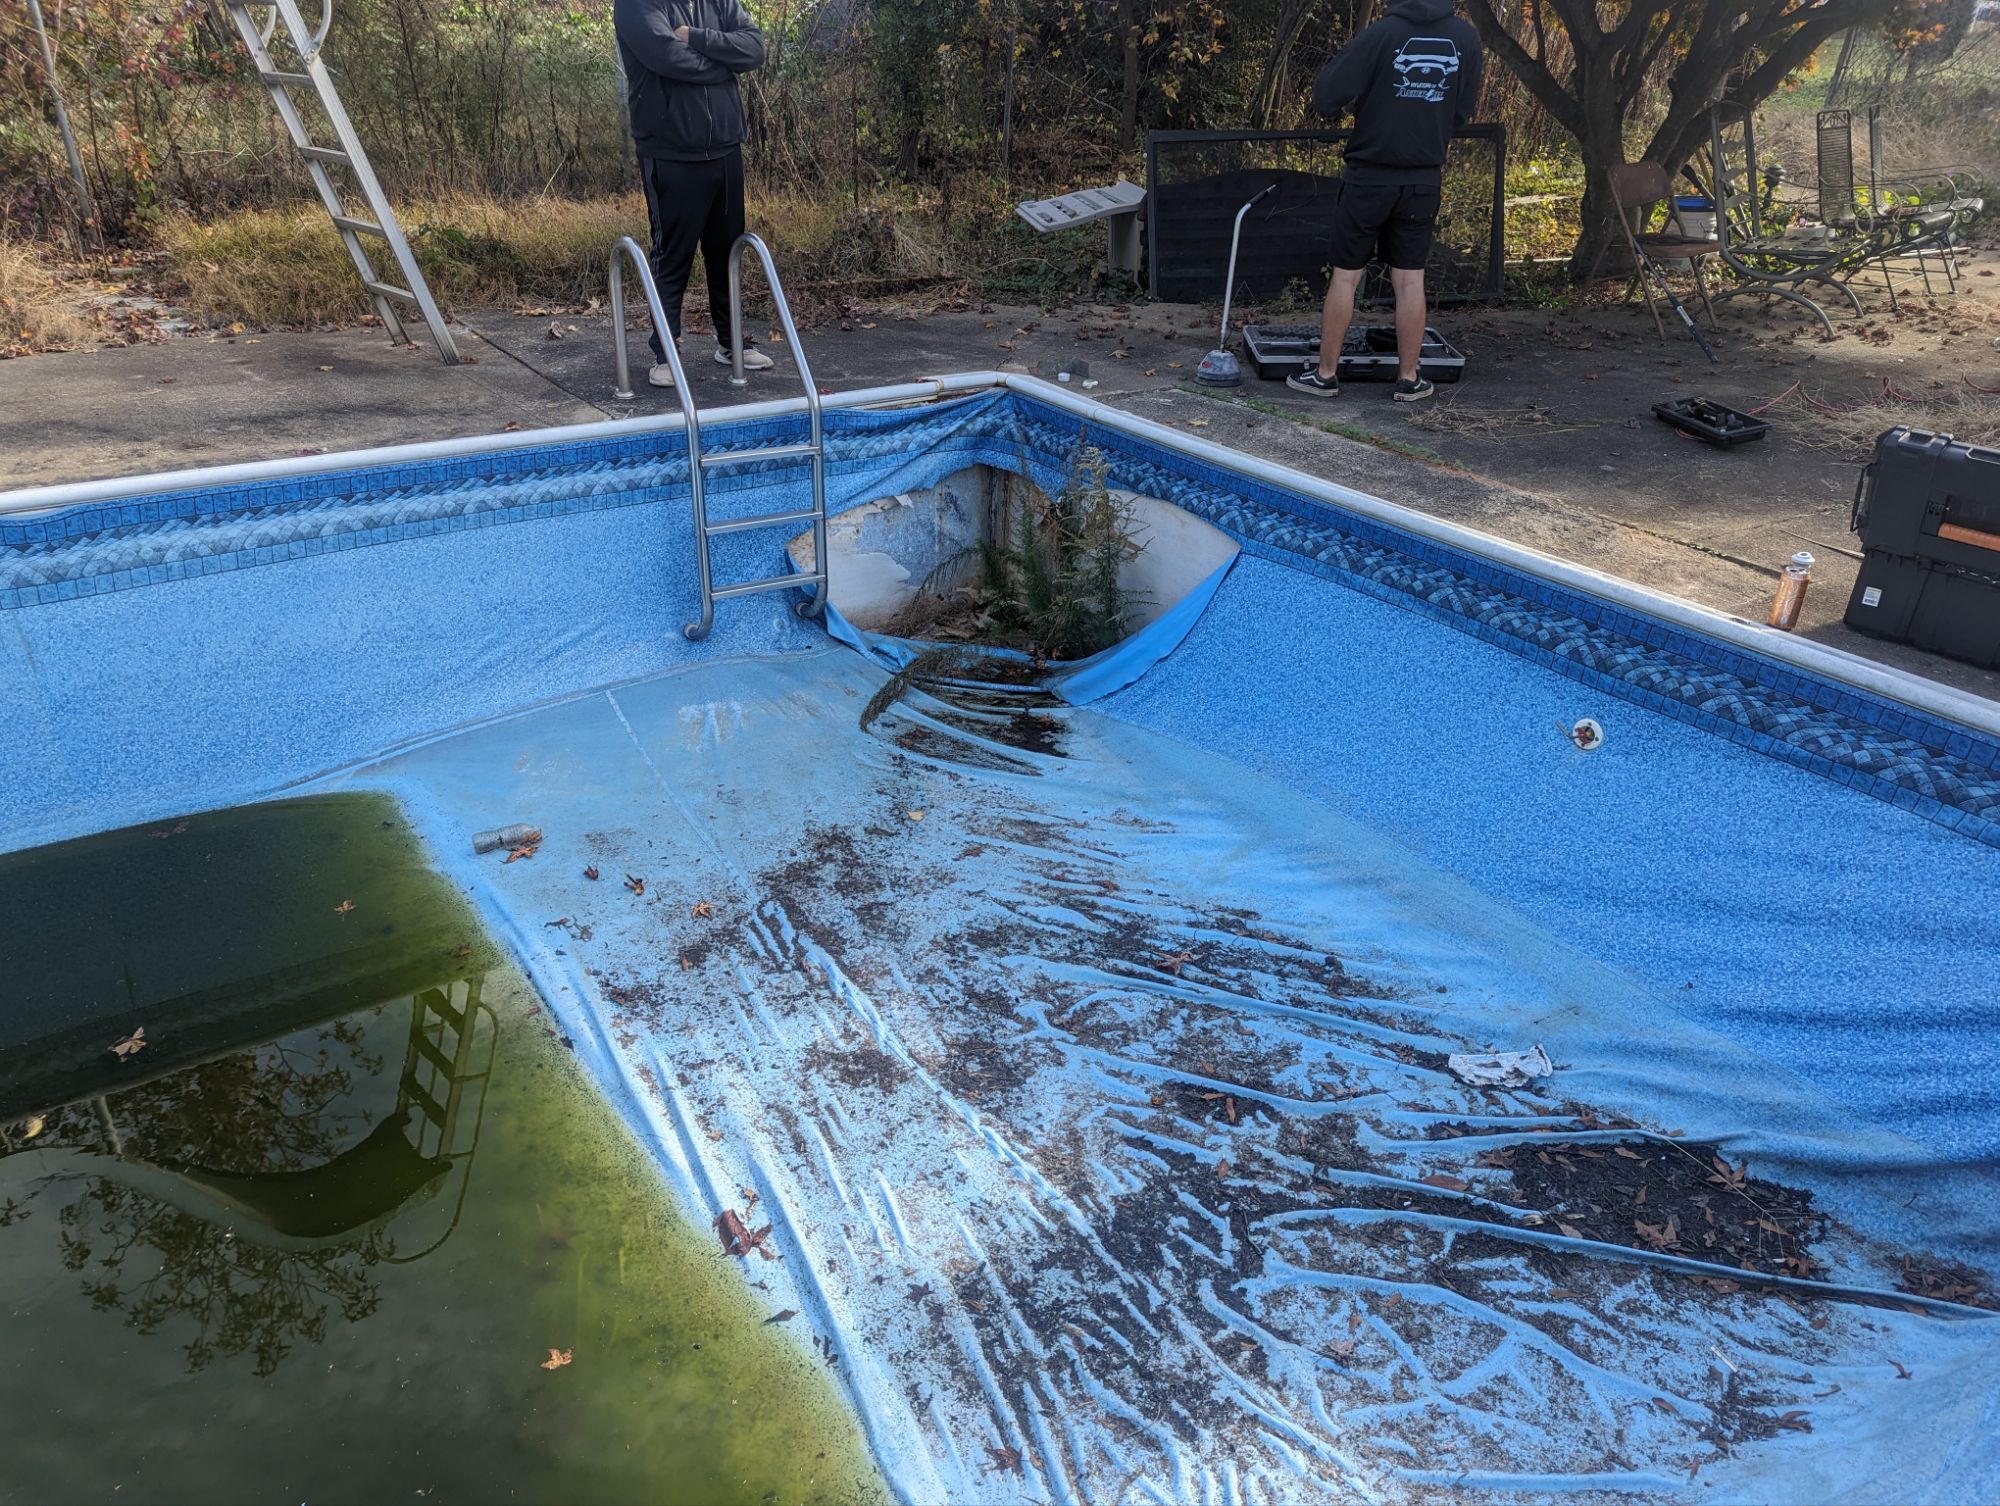 Neglected vinyl liner with large tear that requires liner to be replaced for proper pool leak repair